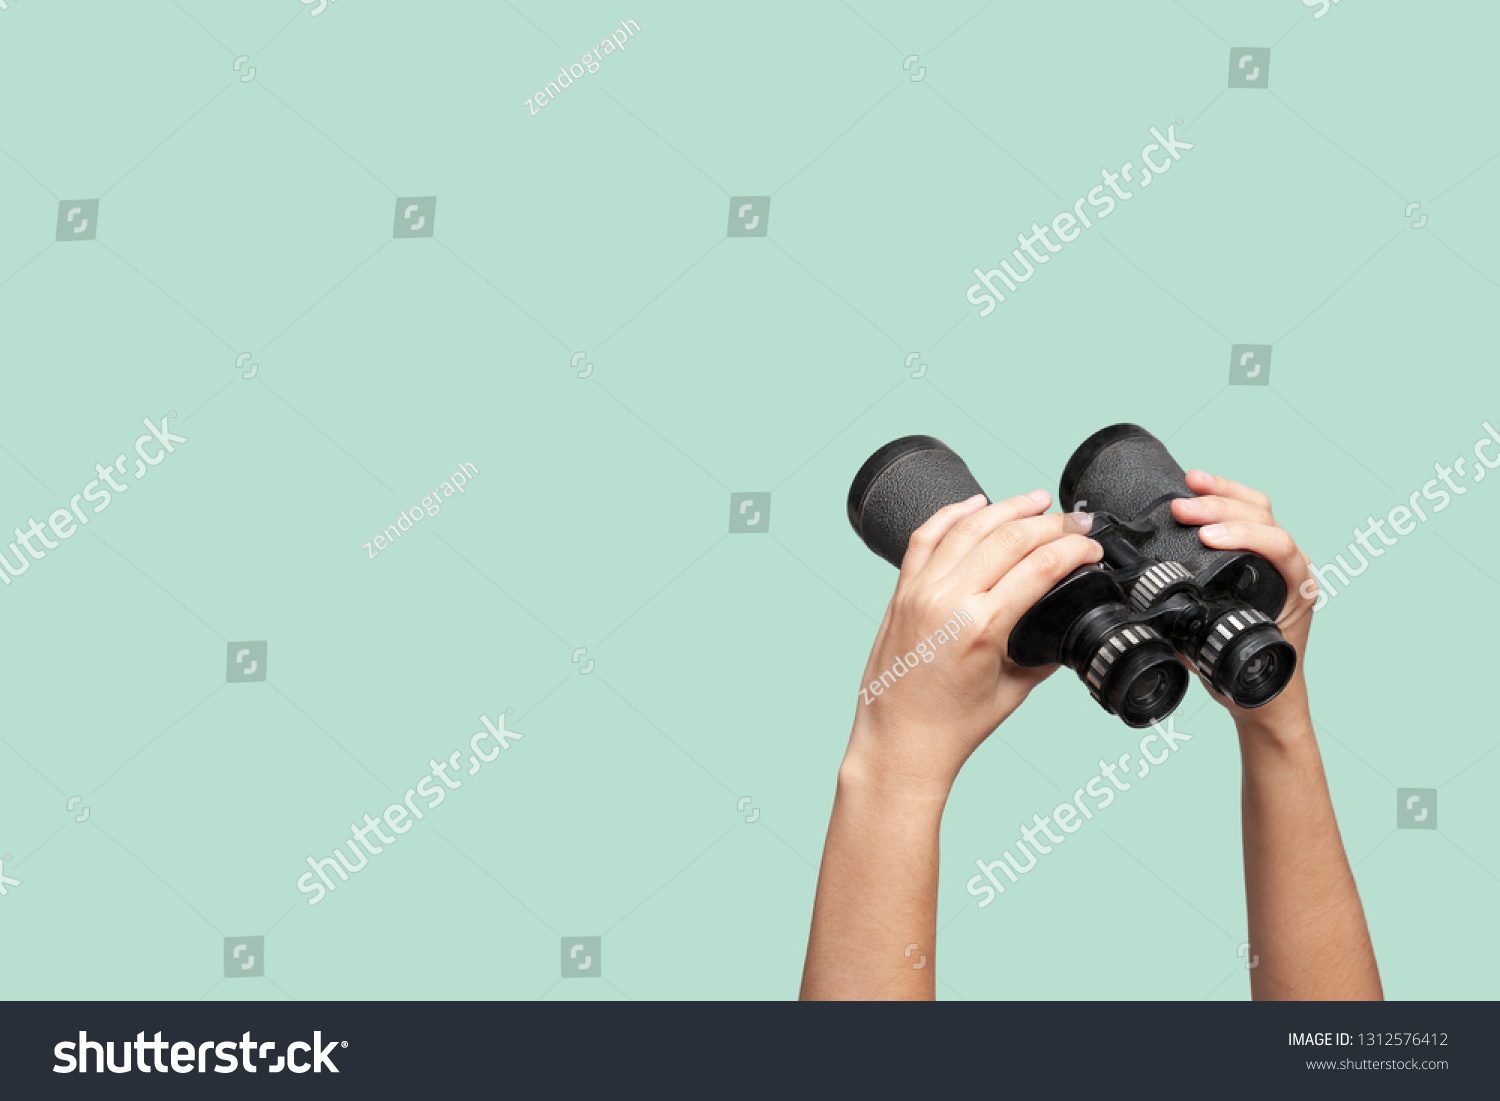 Hands holding binoculars on green background, looking through binoculars, journey, find and search concept. #1312576412